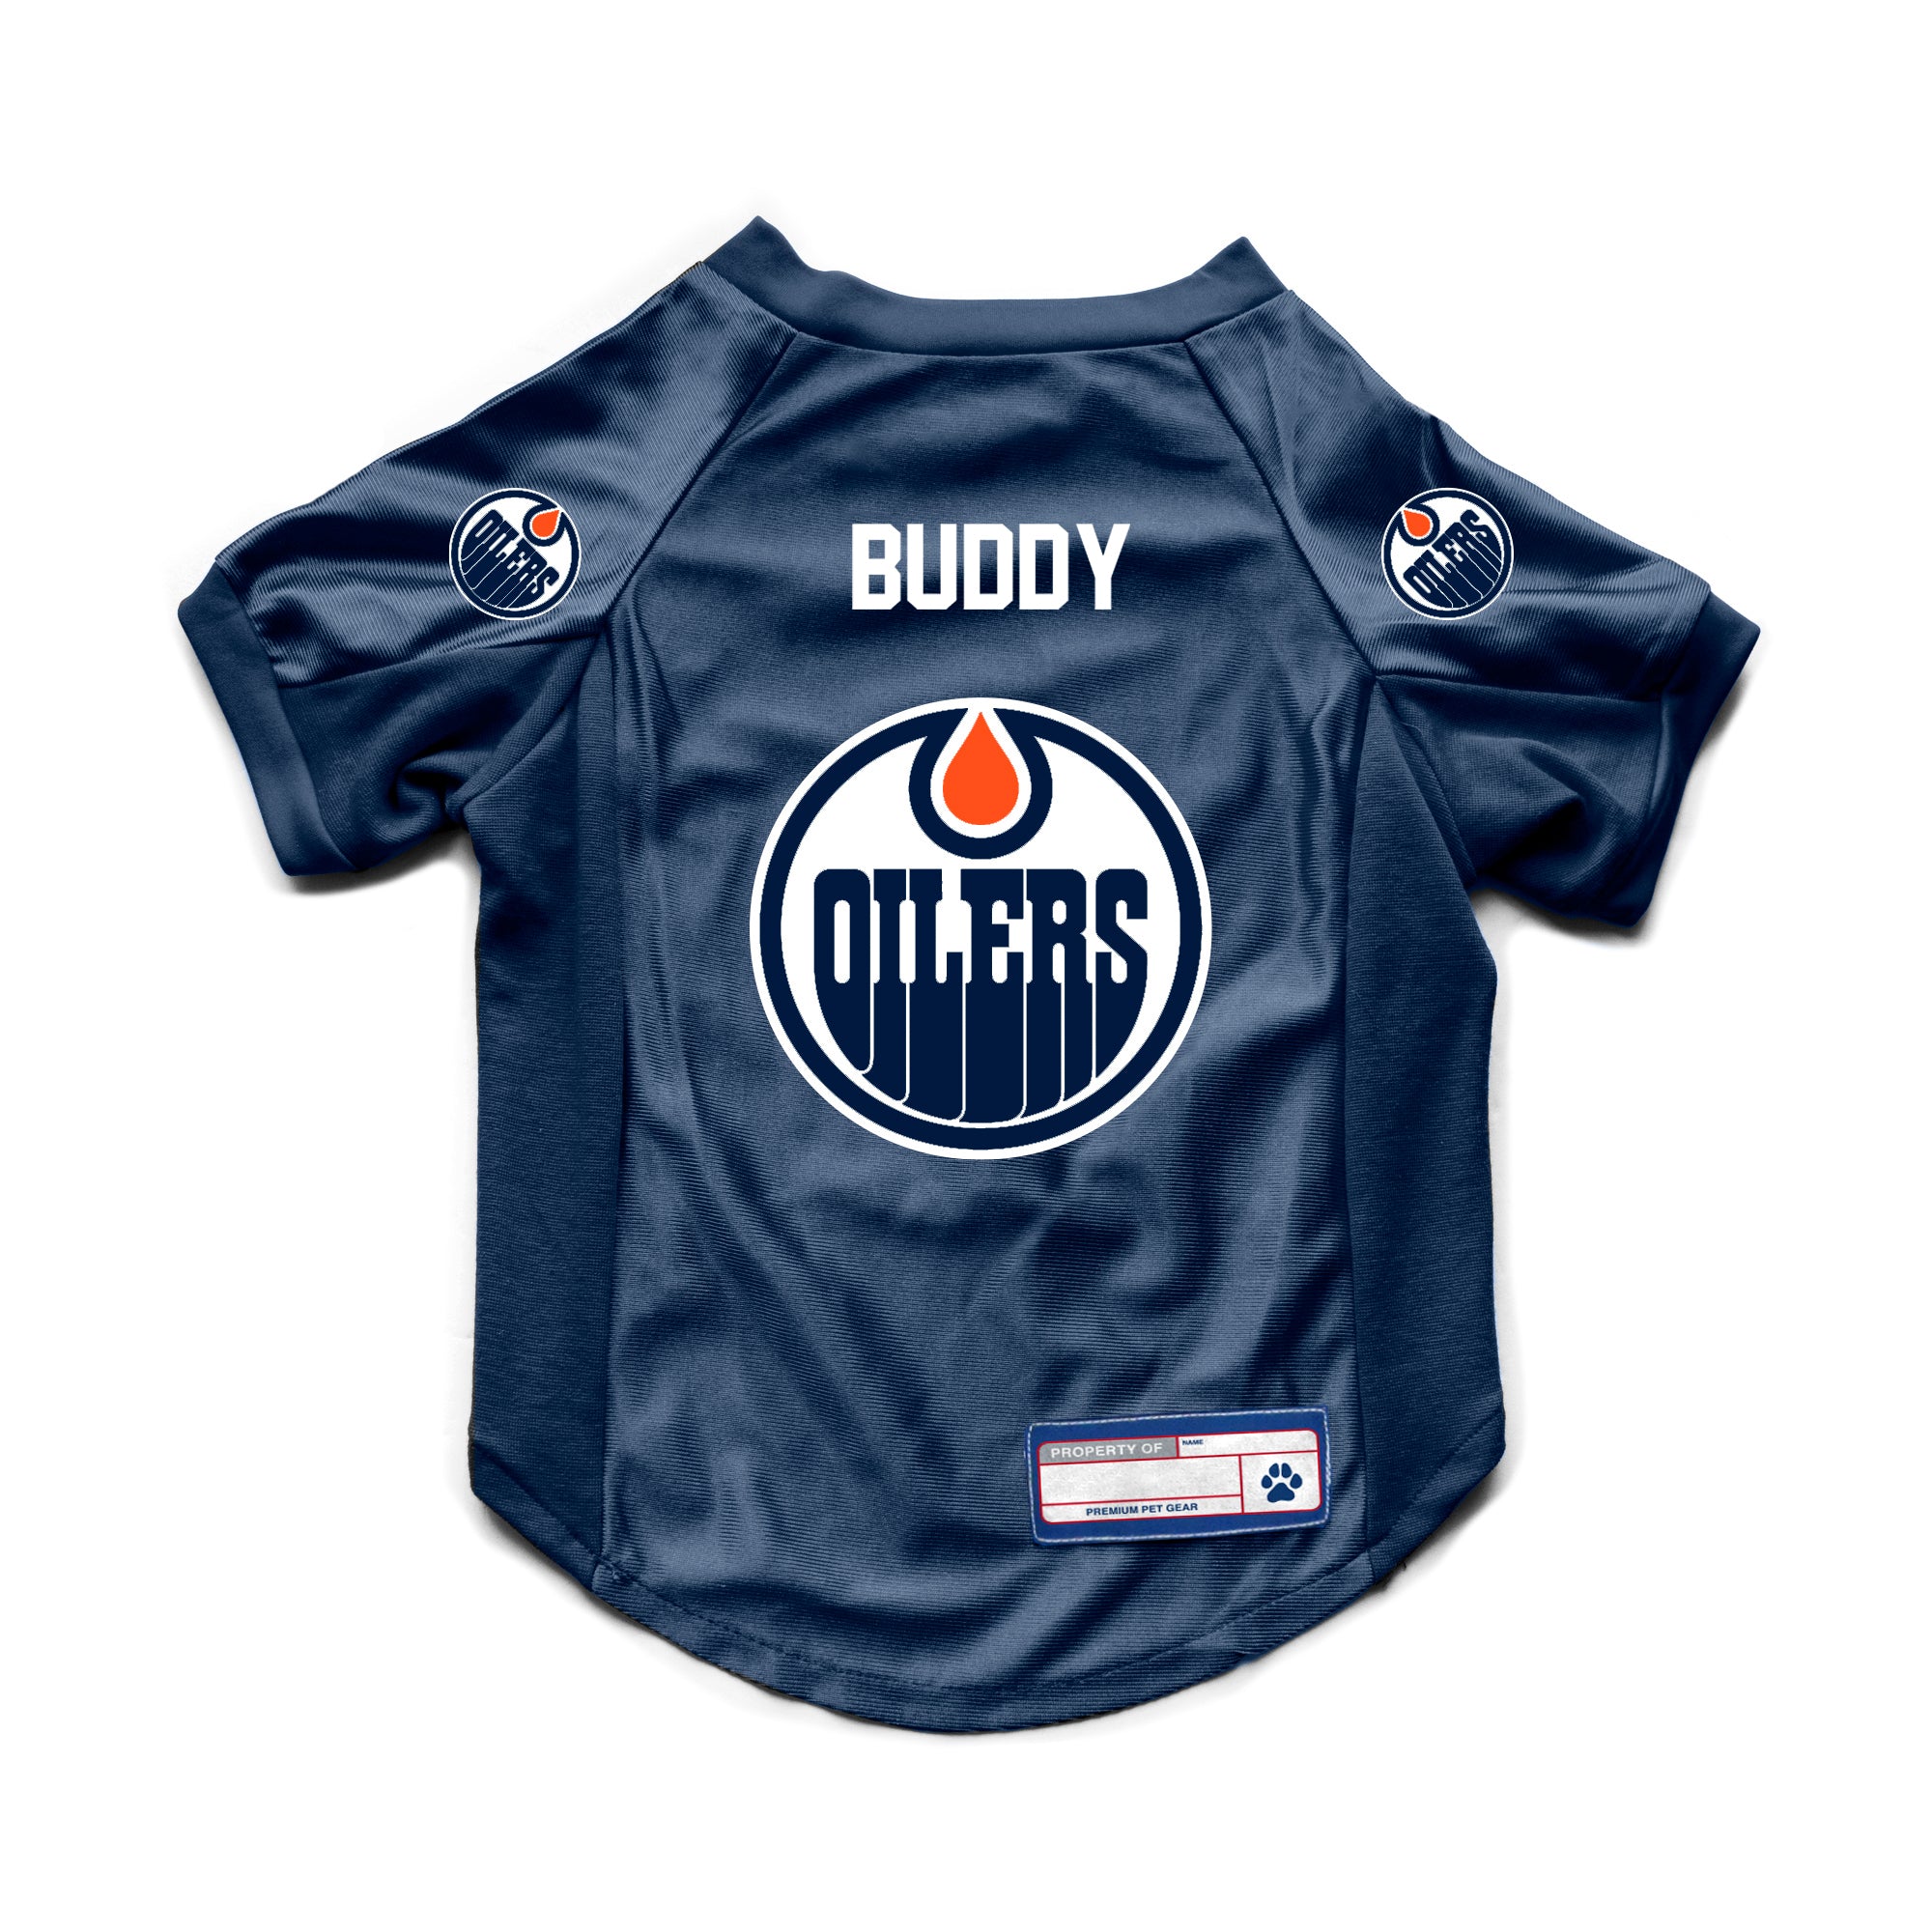 Edmonton Oilers Apparel, Oilers Clothing and Gear